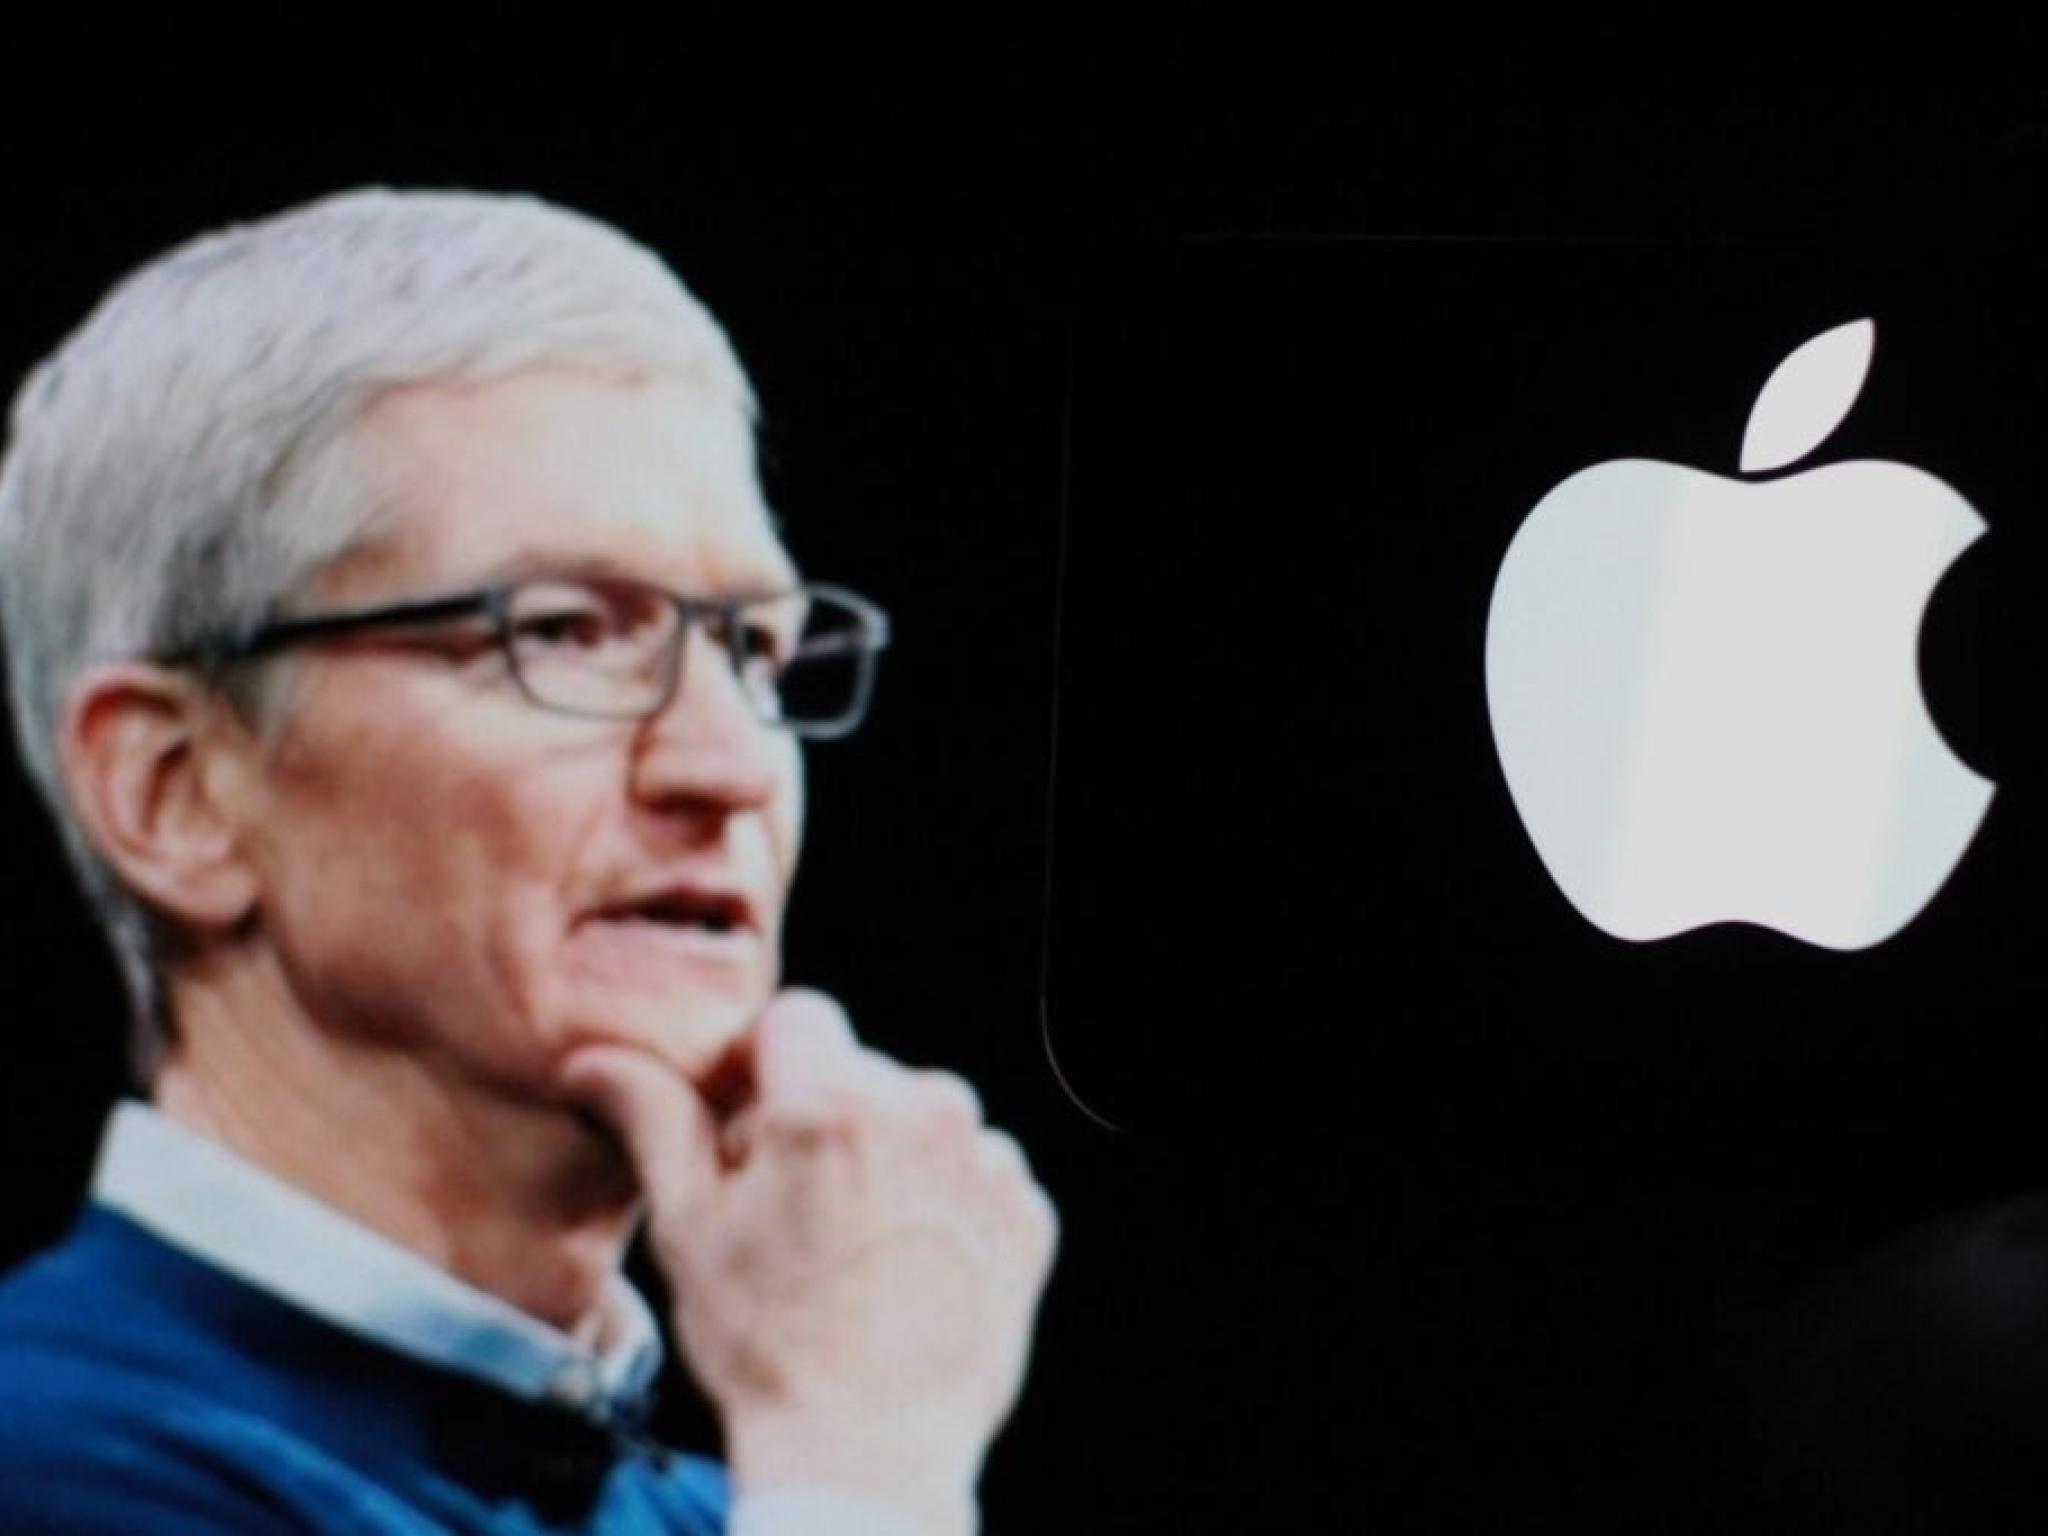  apple-faces-eu-antitrust-probe-for-breaking-digital-rules-tim-cooks-company-may-face-fine-up-to-10-of-global-revenue 